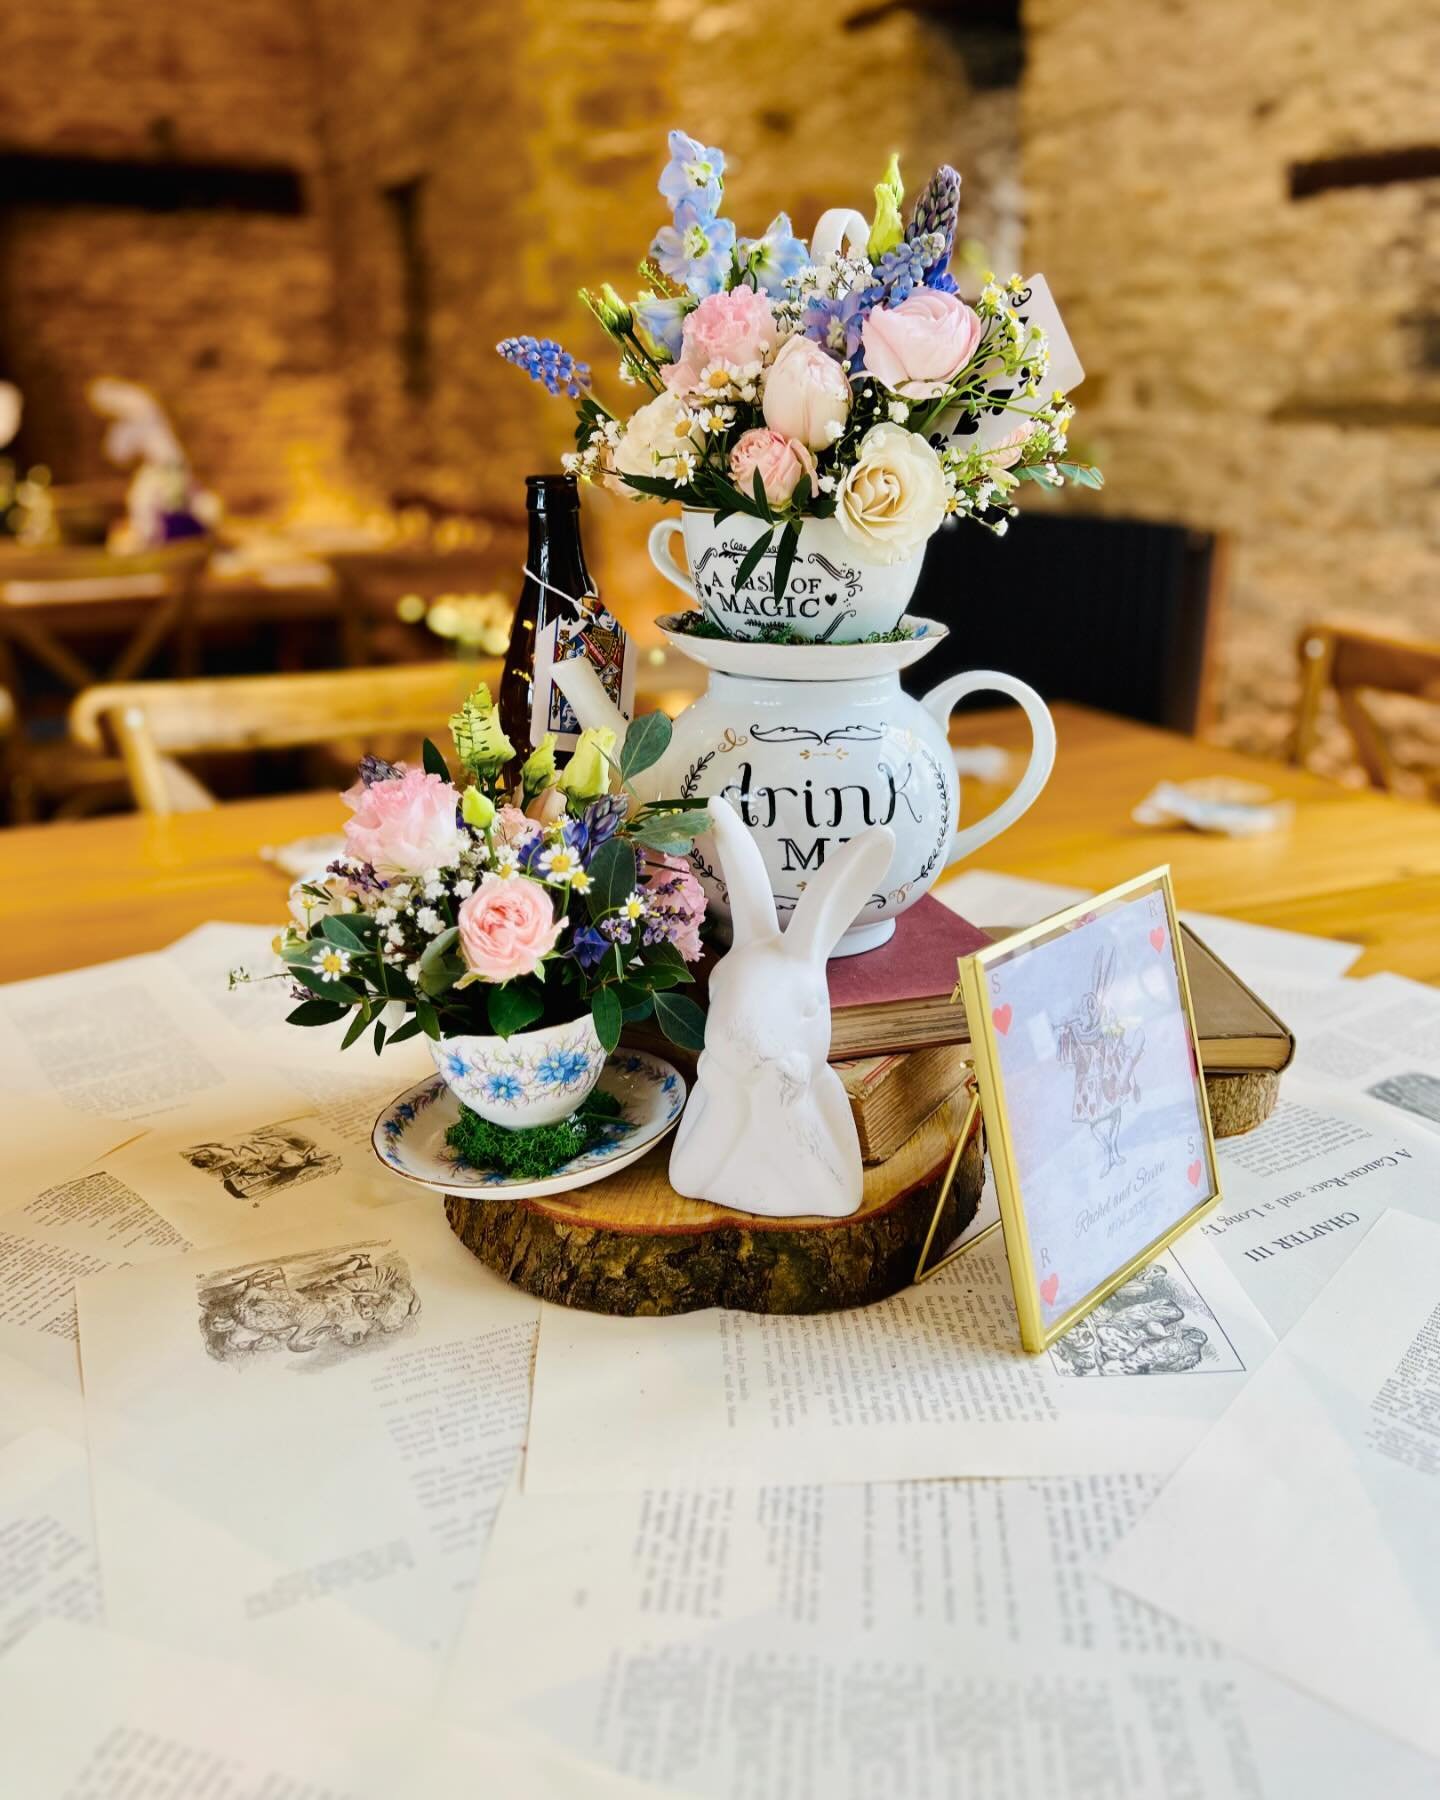 R &amp; S invested meticulous effort in curating their Alice in Wonderland wedding day at @thegreatbarnaynho. 

Overflowing teacups &amp; teapots, filled with seasonal pastel blooms, rabbits, book pages, and playing cards served as enchanting centrep